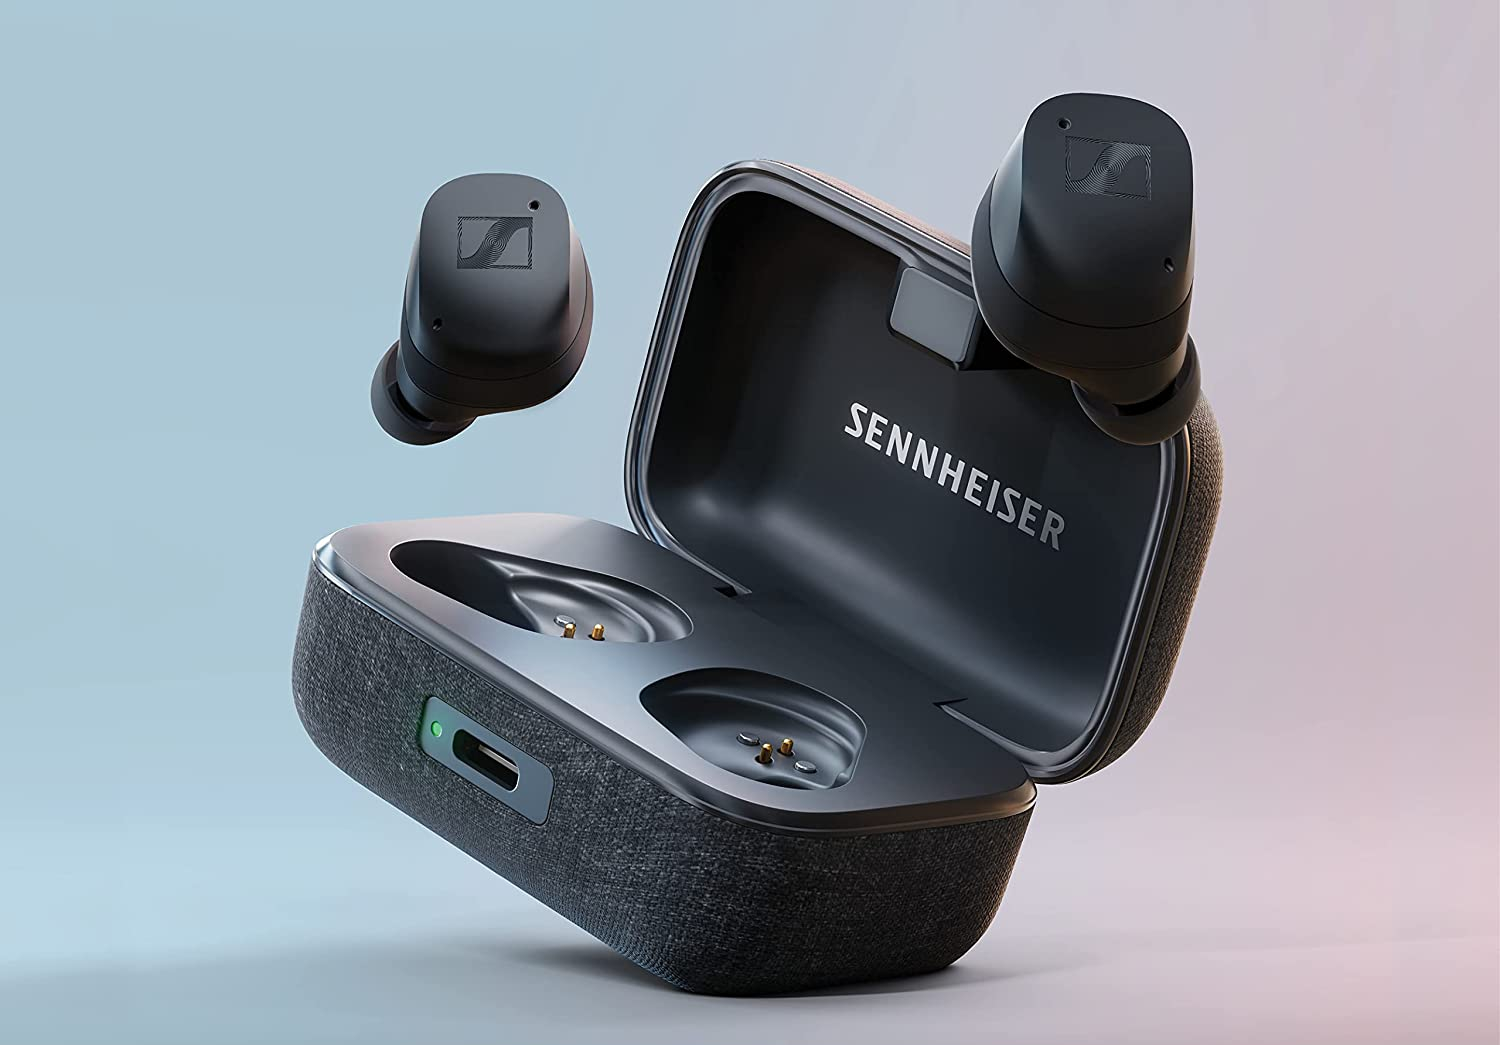 Sennheiser Momentum True Wireless 3: Premium earbuds launch with up to 28 hours of battery life and Hybrid Adaptive ANC for US$249.95 - Notebookcheck.net